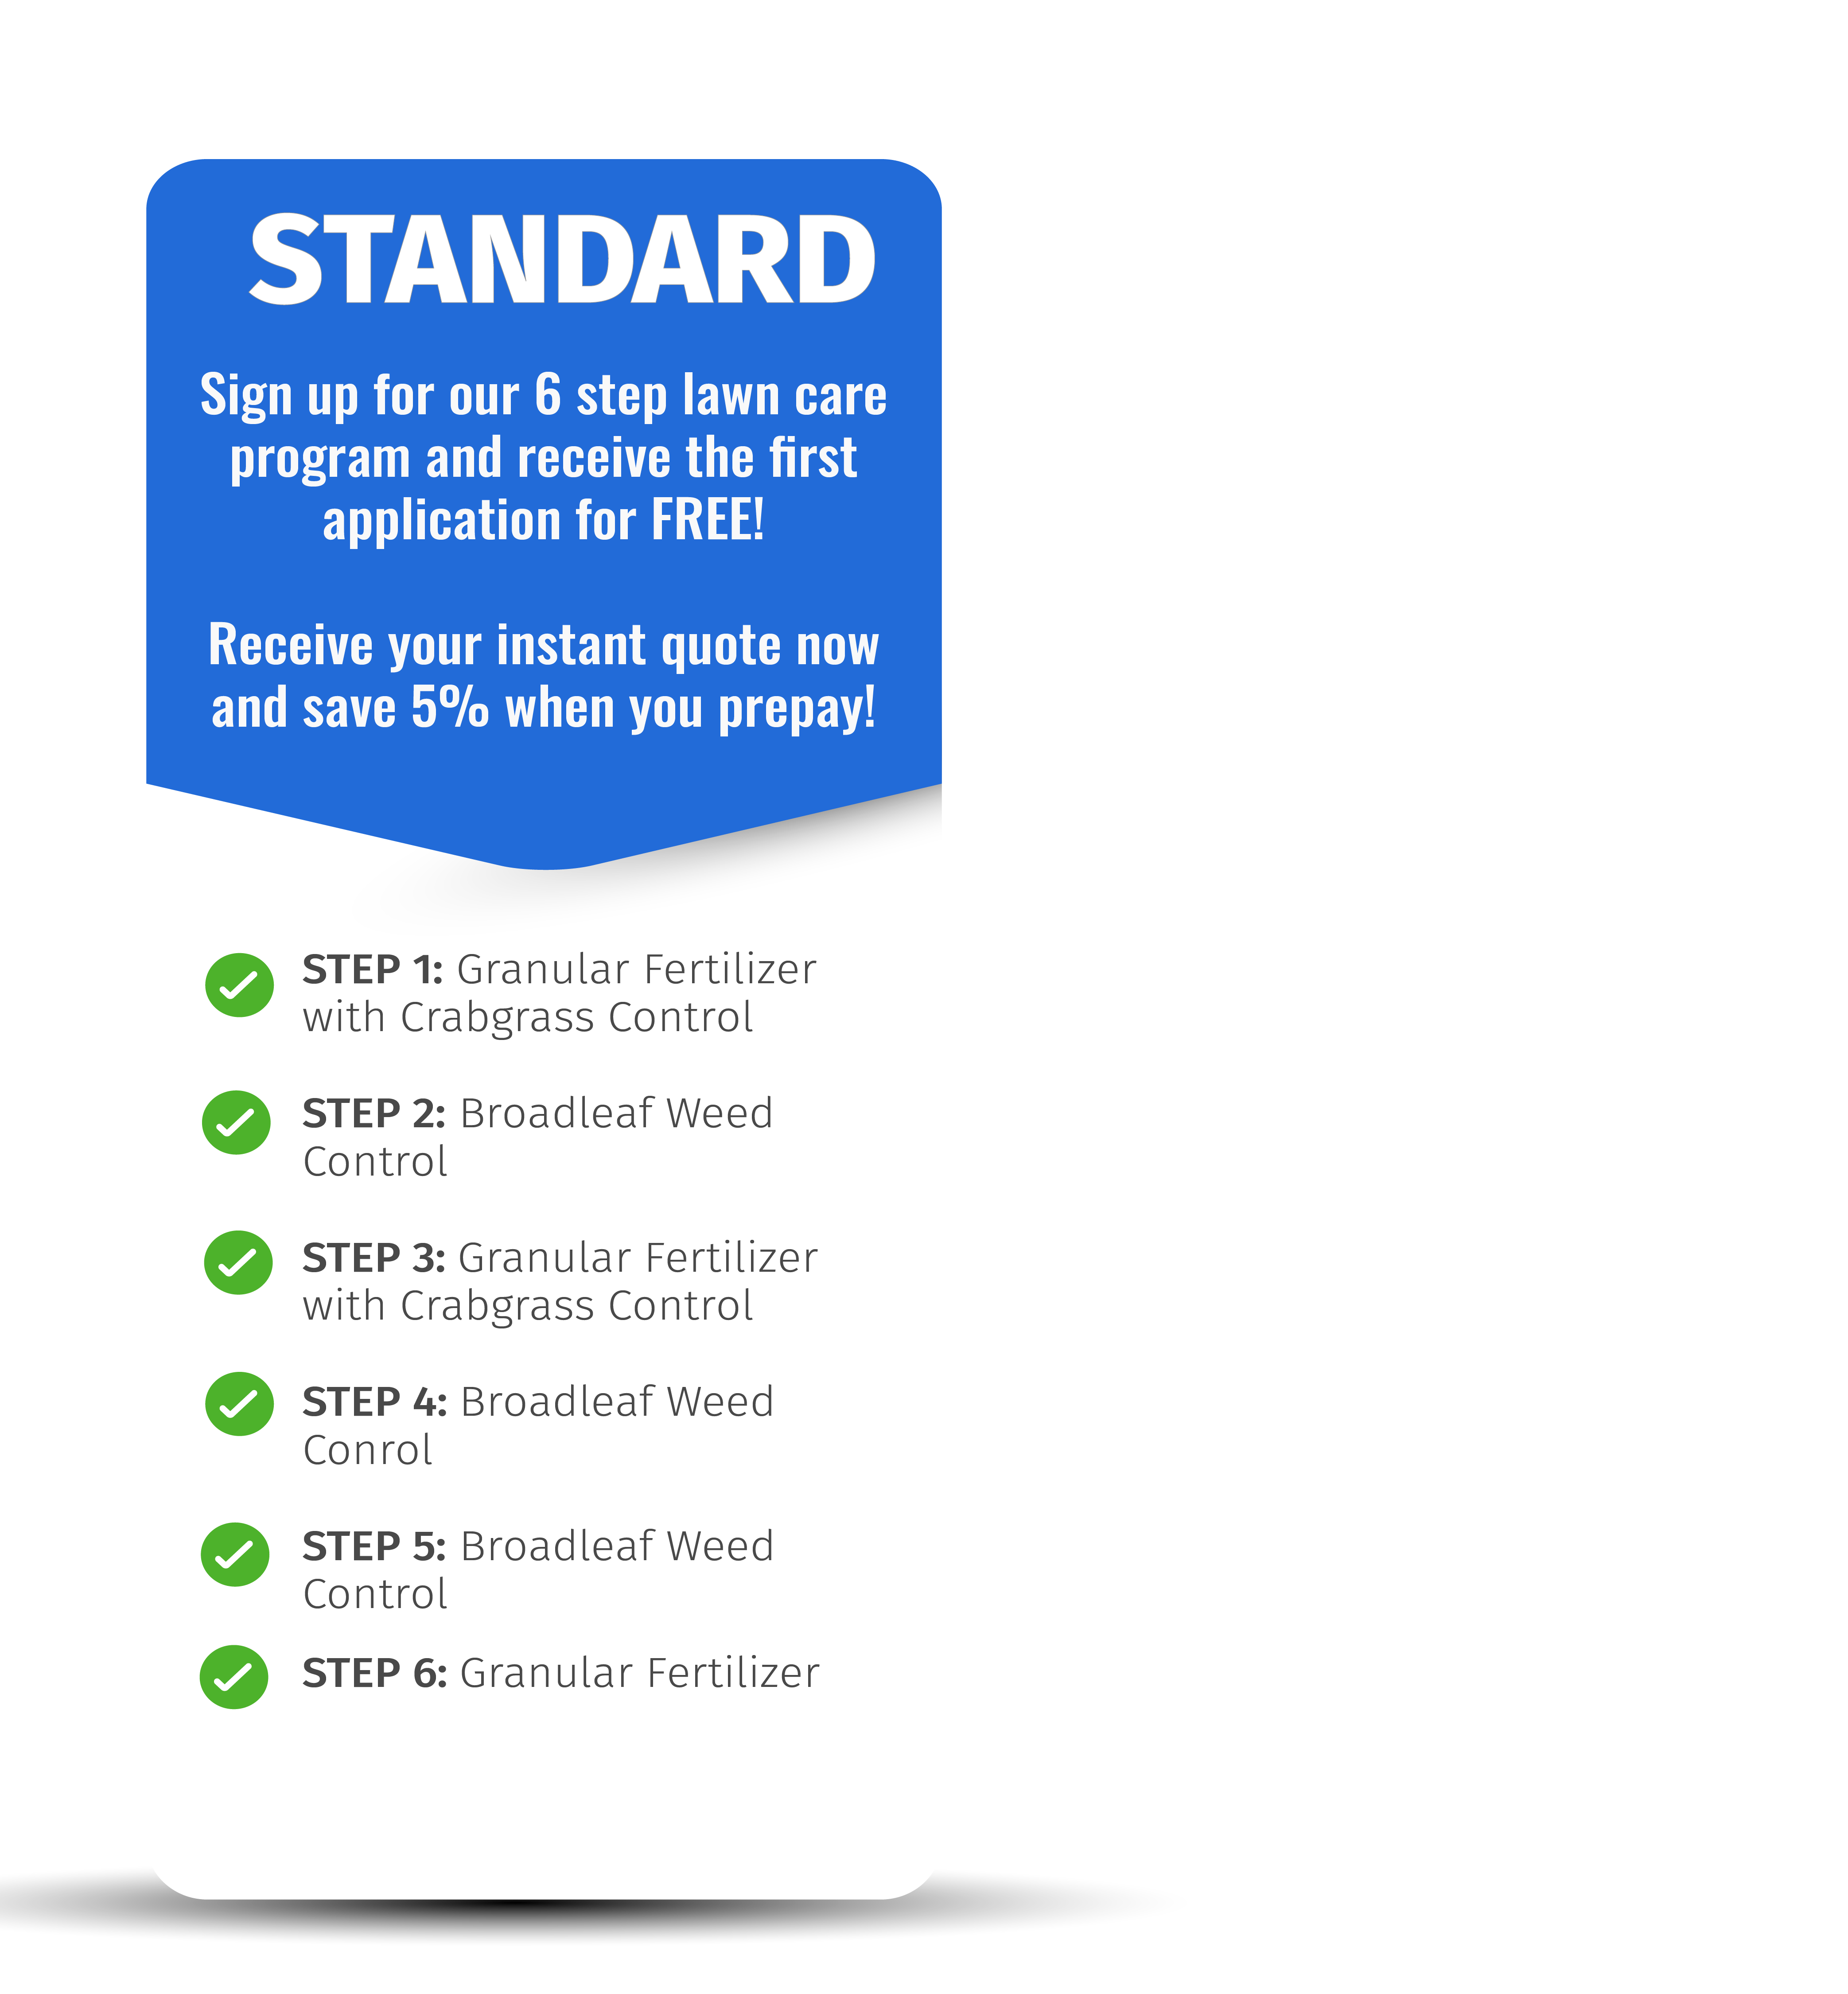 An infographic showing Spring Touch's Standard 6-step lawn care program.